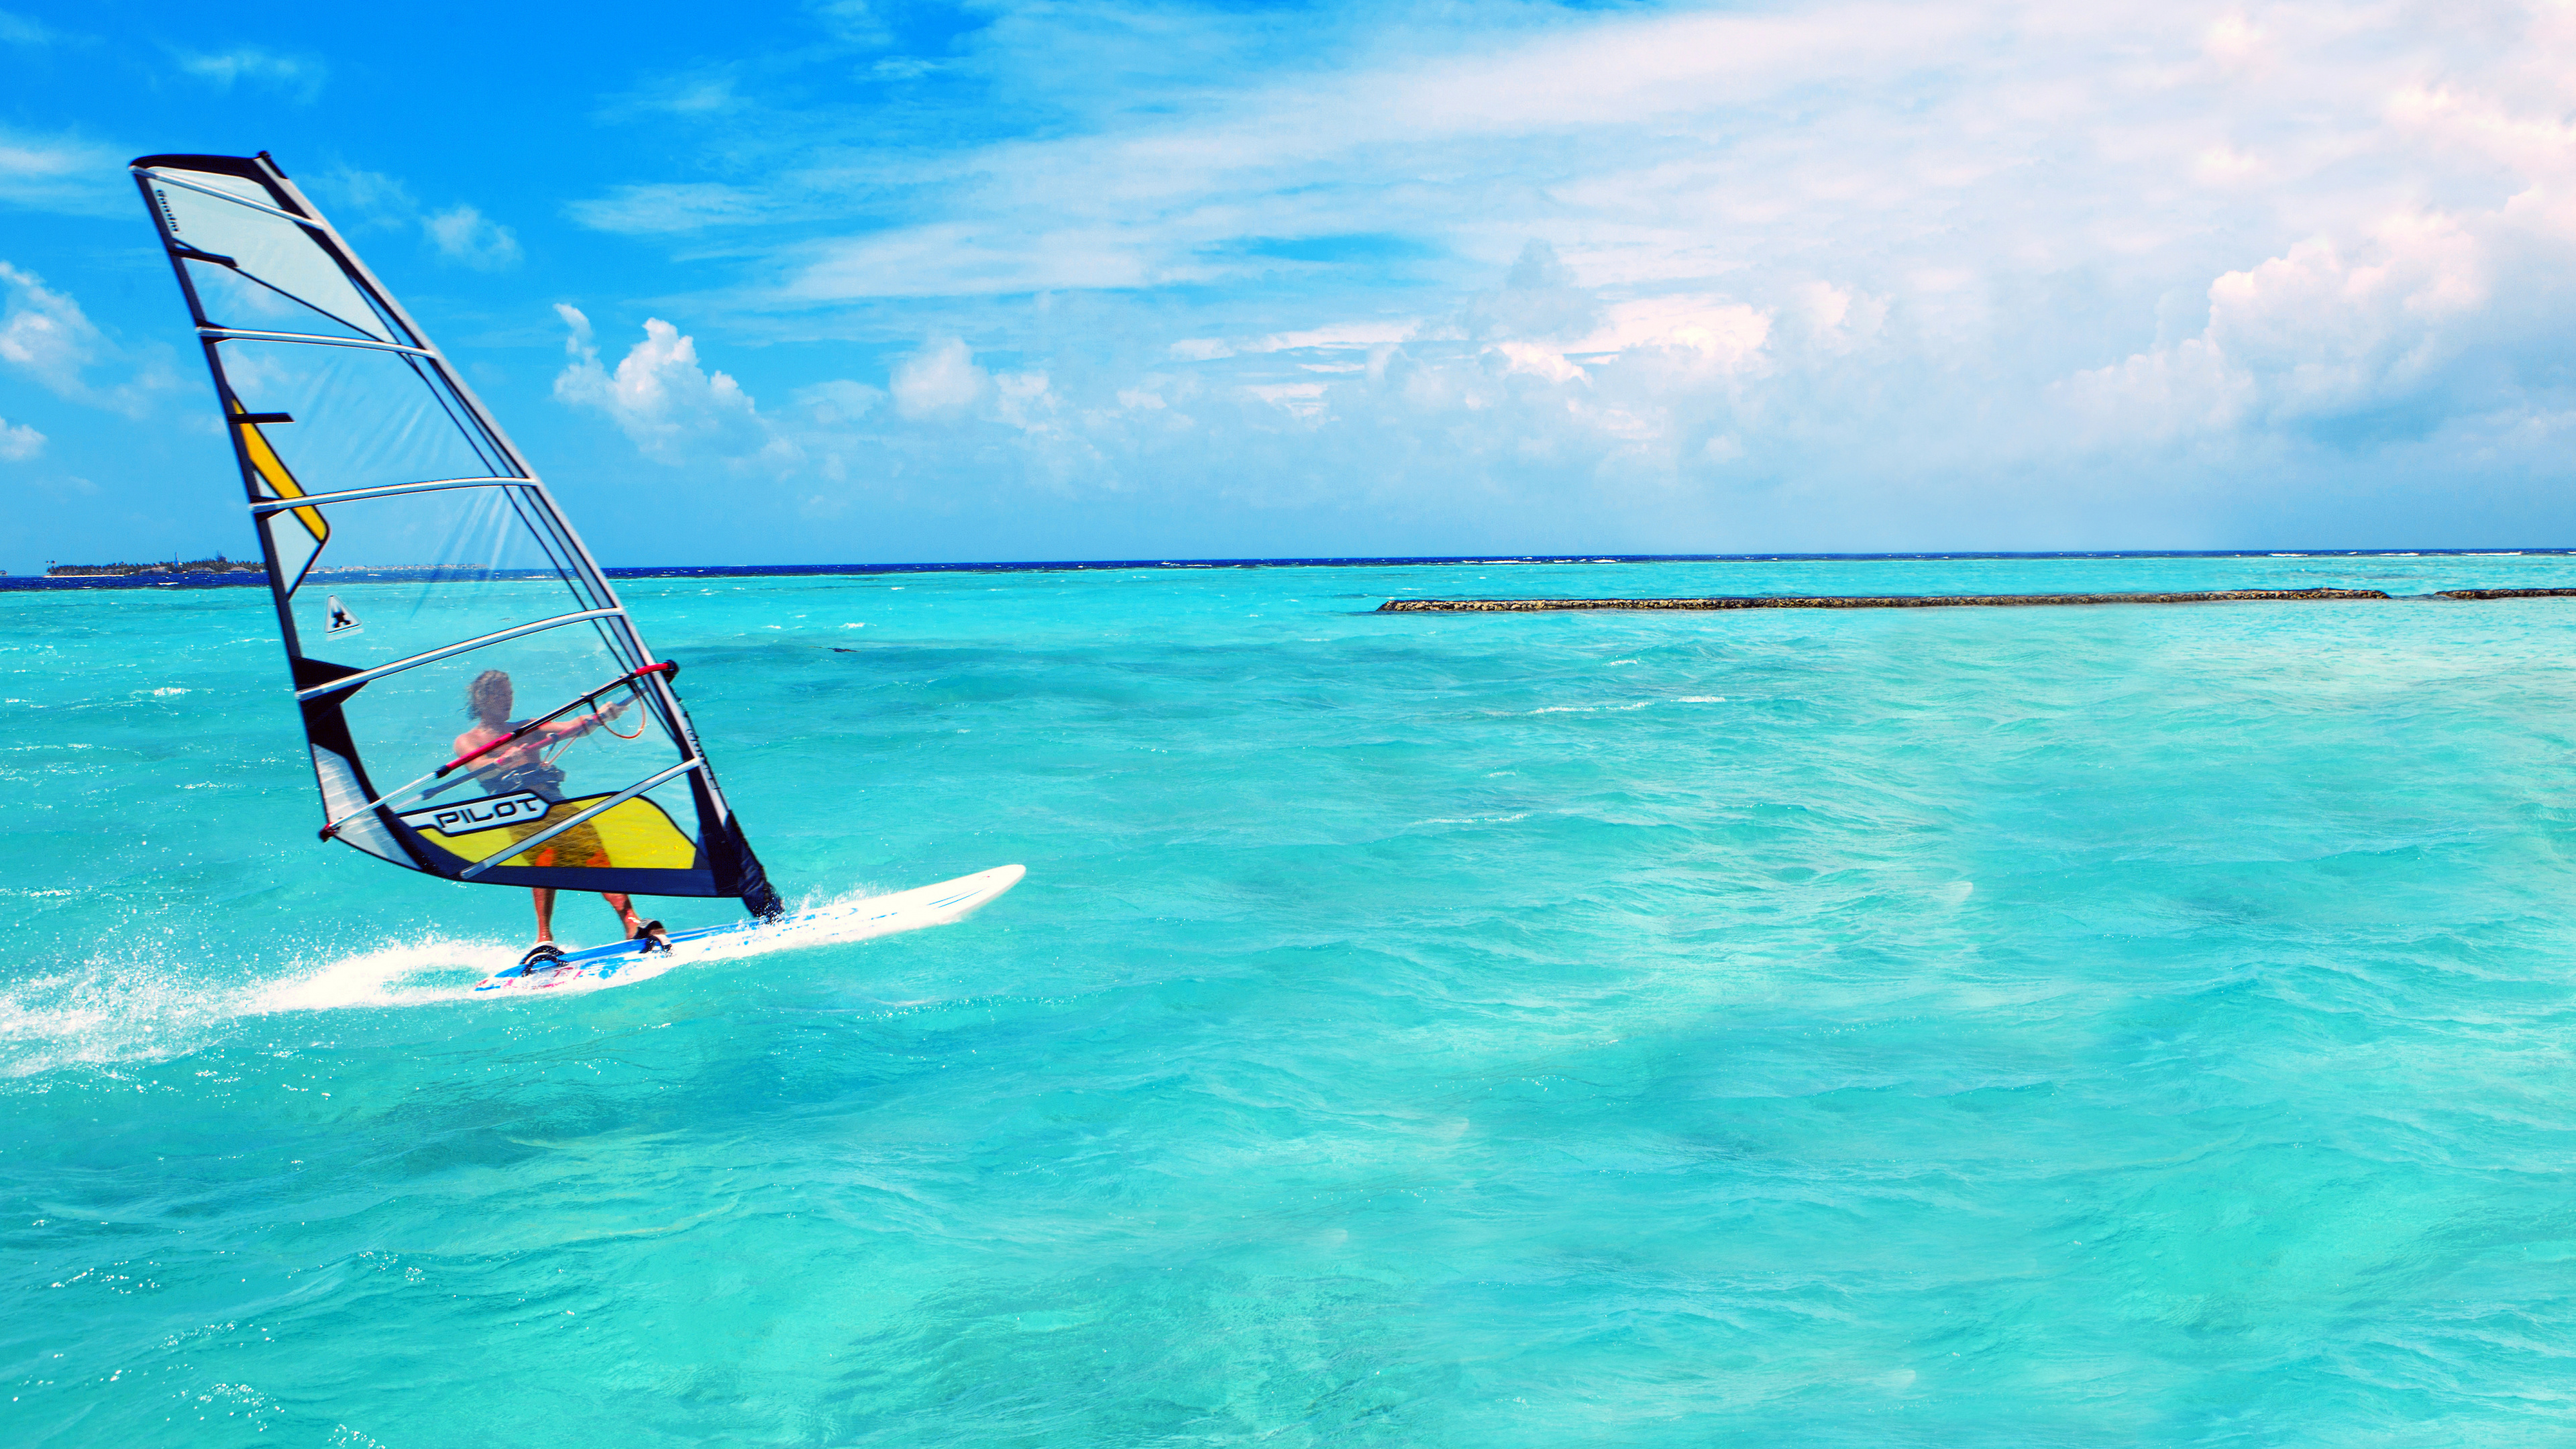 Yellow and White Sail Boat on Blue Sea Under Blue Sky During Daytime. Wallpaper in 3840x2160 Resolution